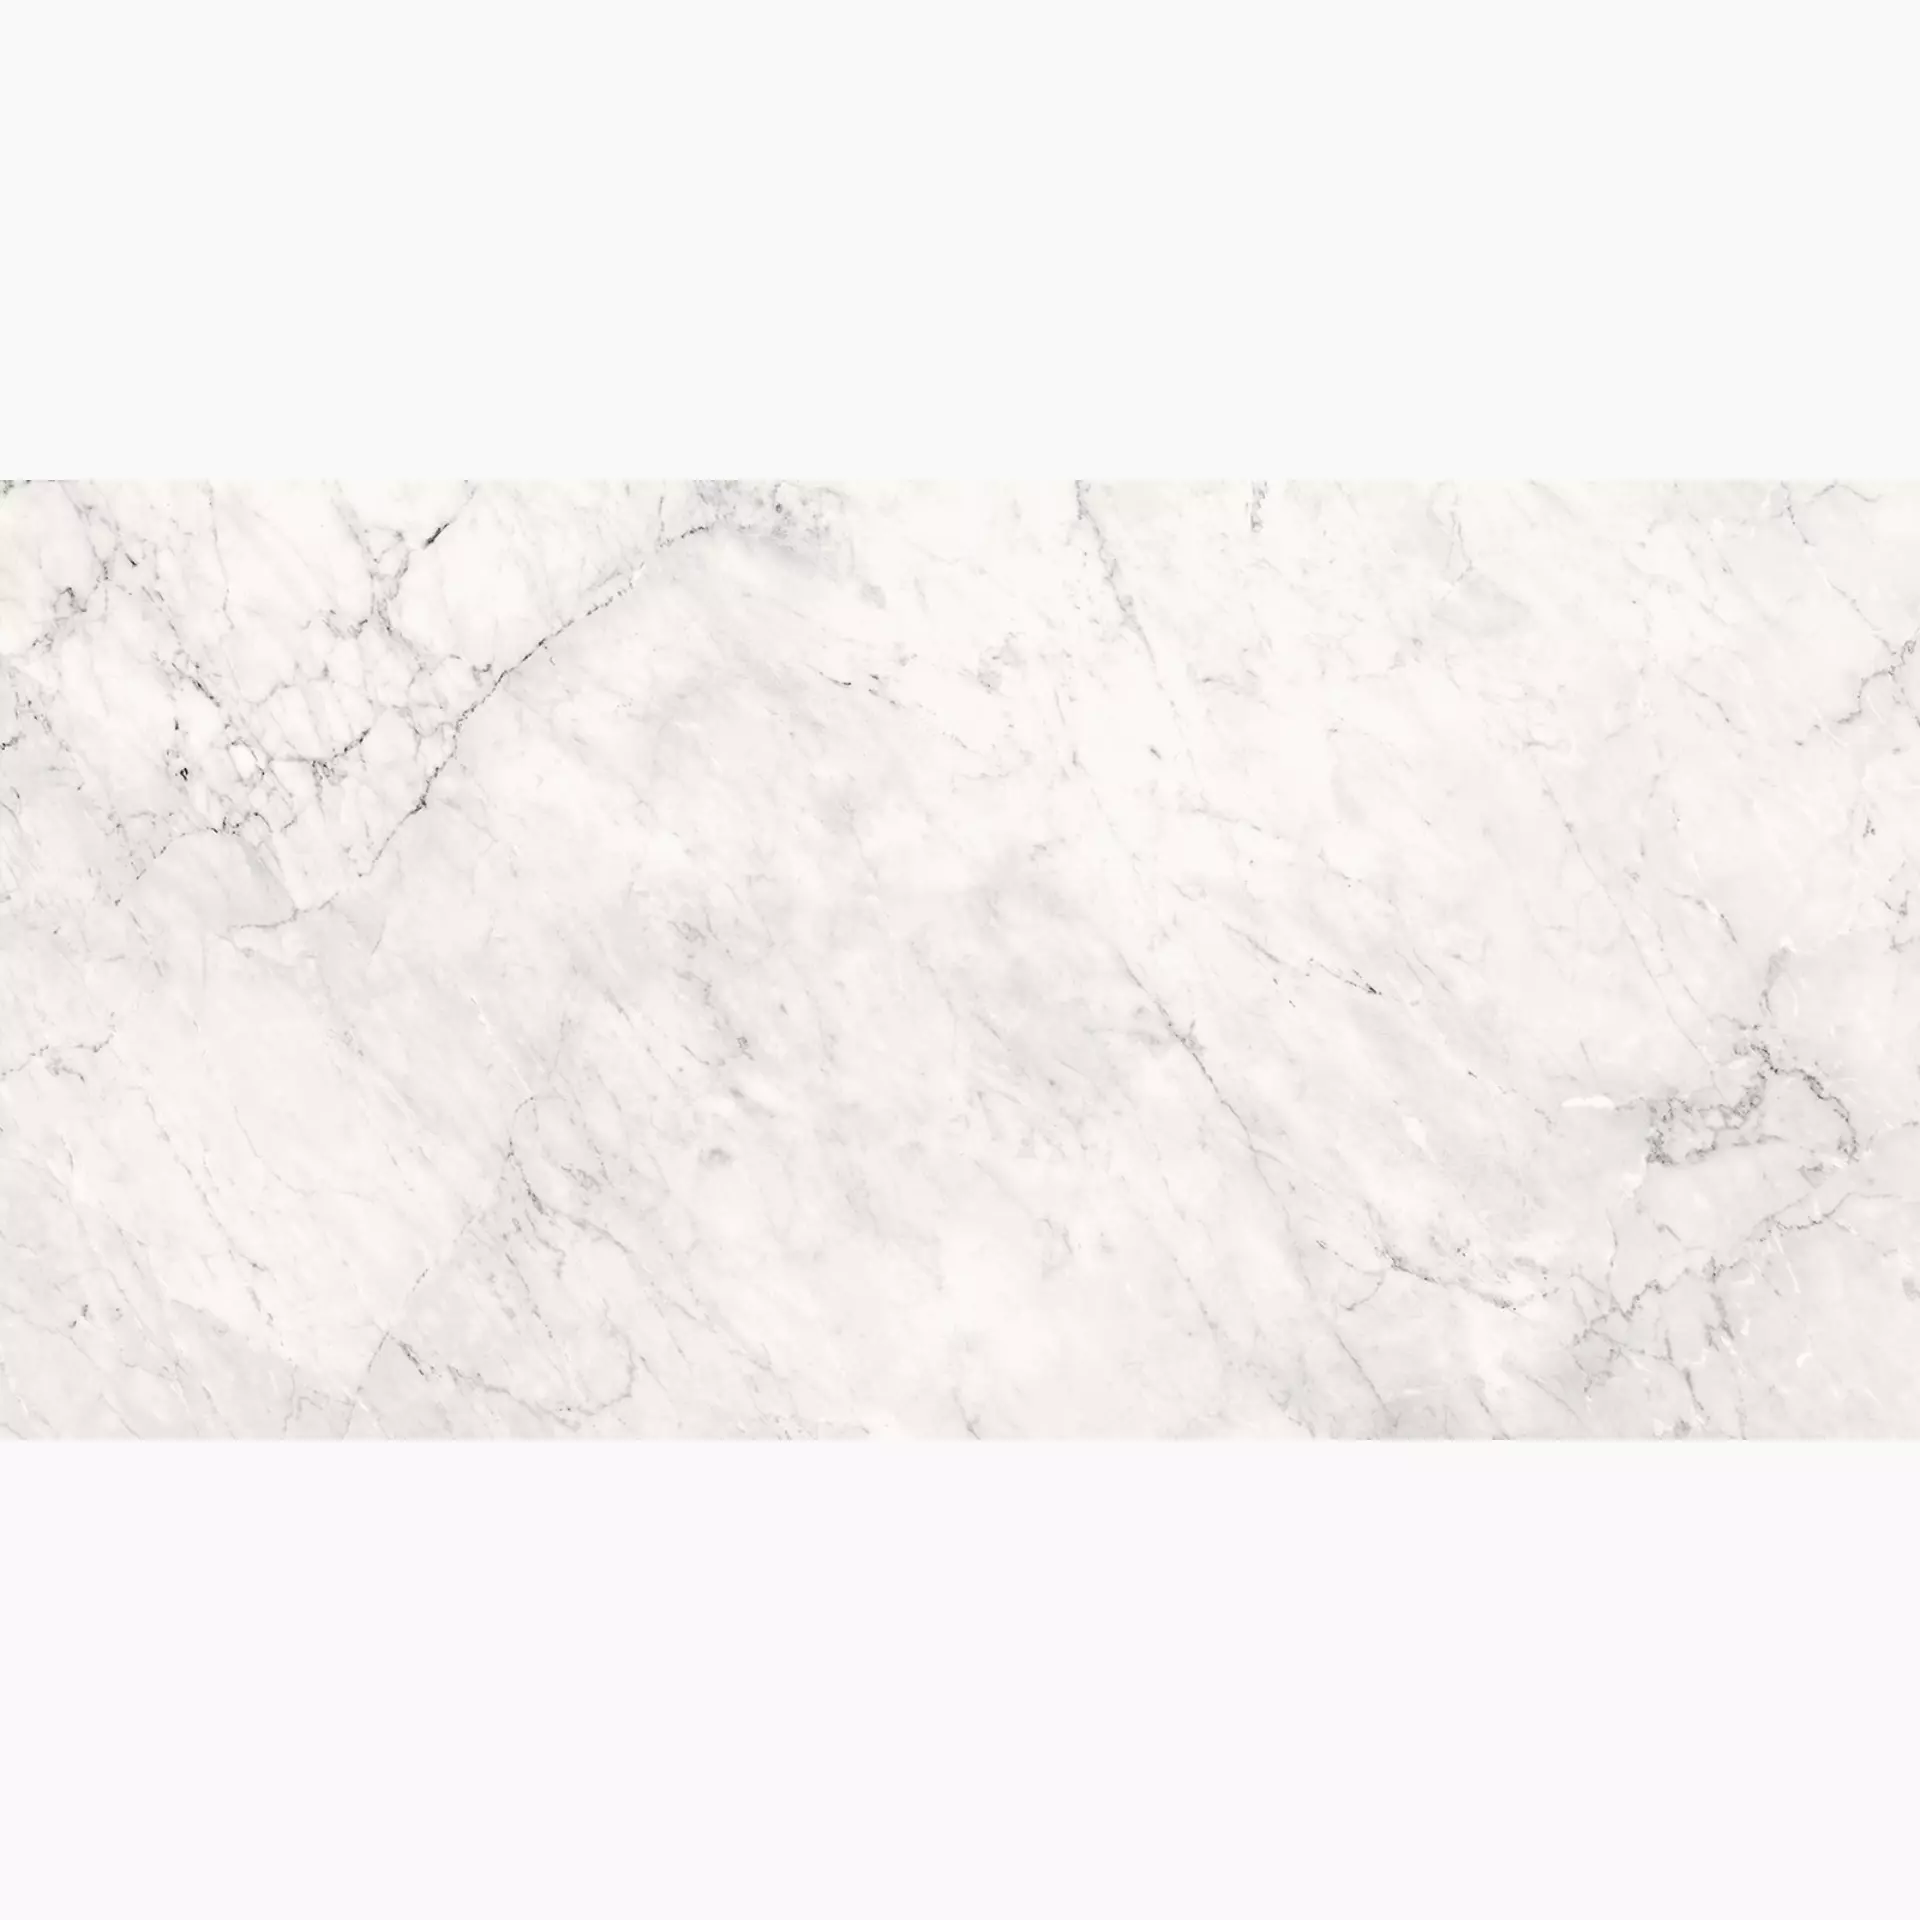 La Faenza Aesthetica White Honed Flat Glossy 179385 60x120cm rectified 6,5mm - AE CAL6 12 LP